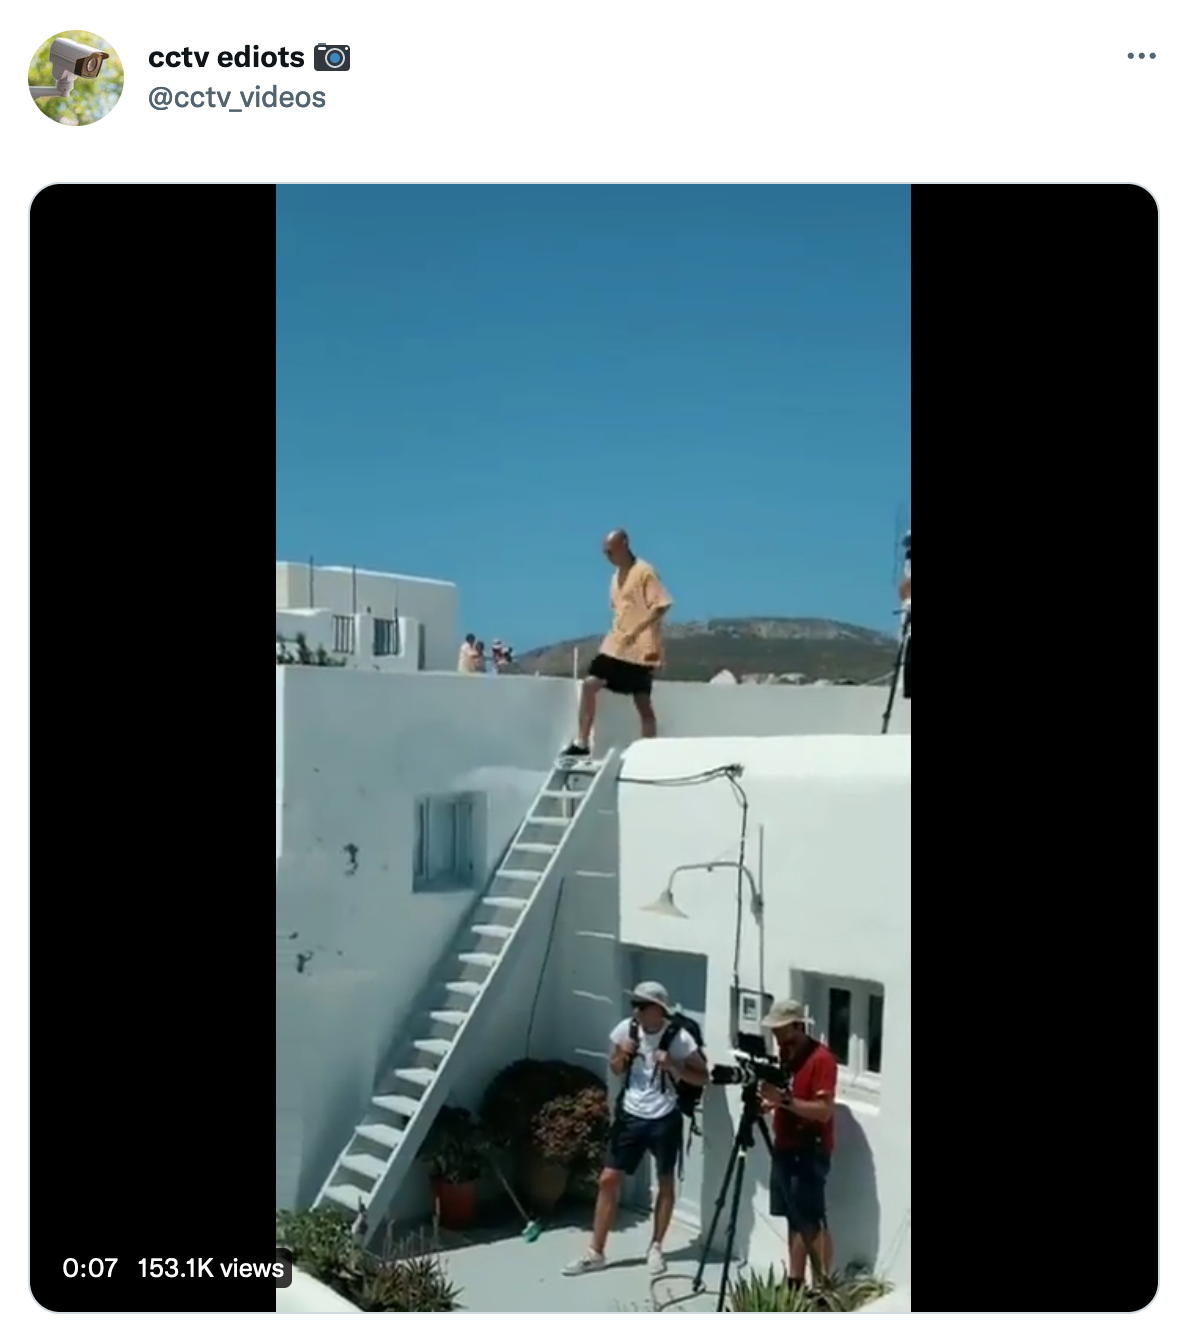 Tweet showing a man about to go down some stairs.